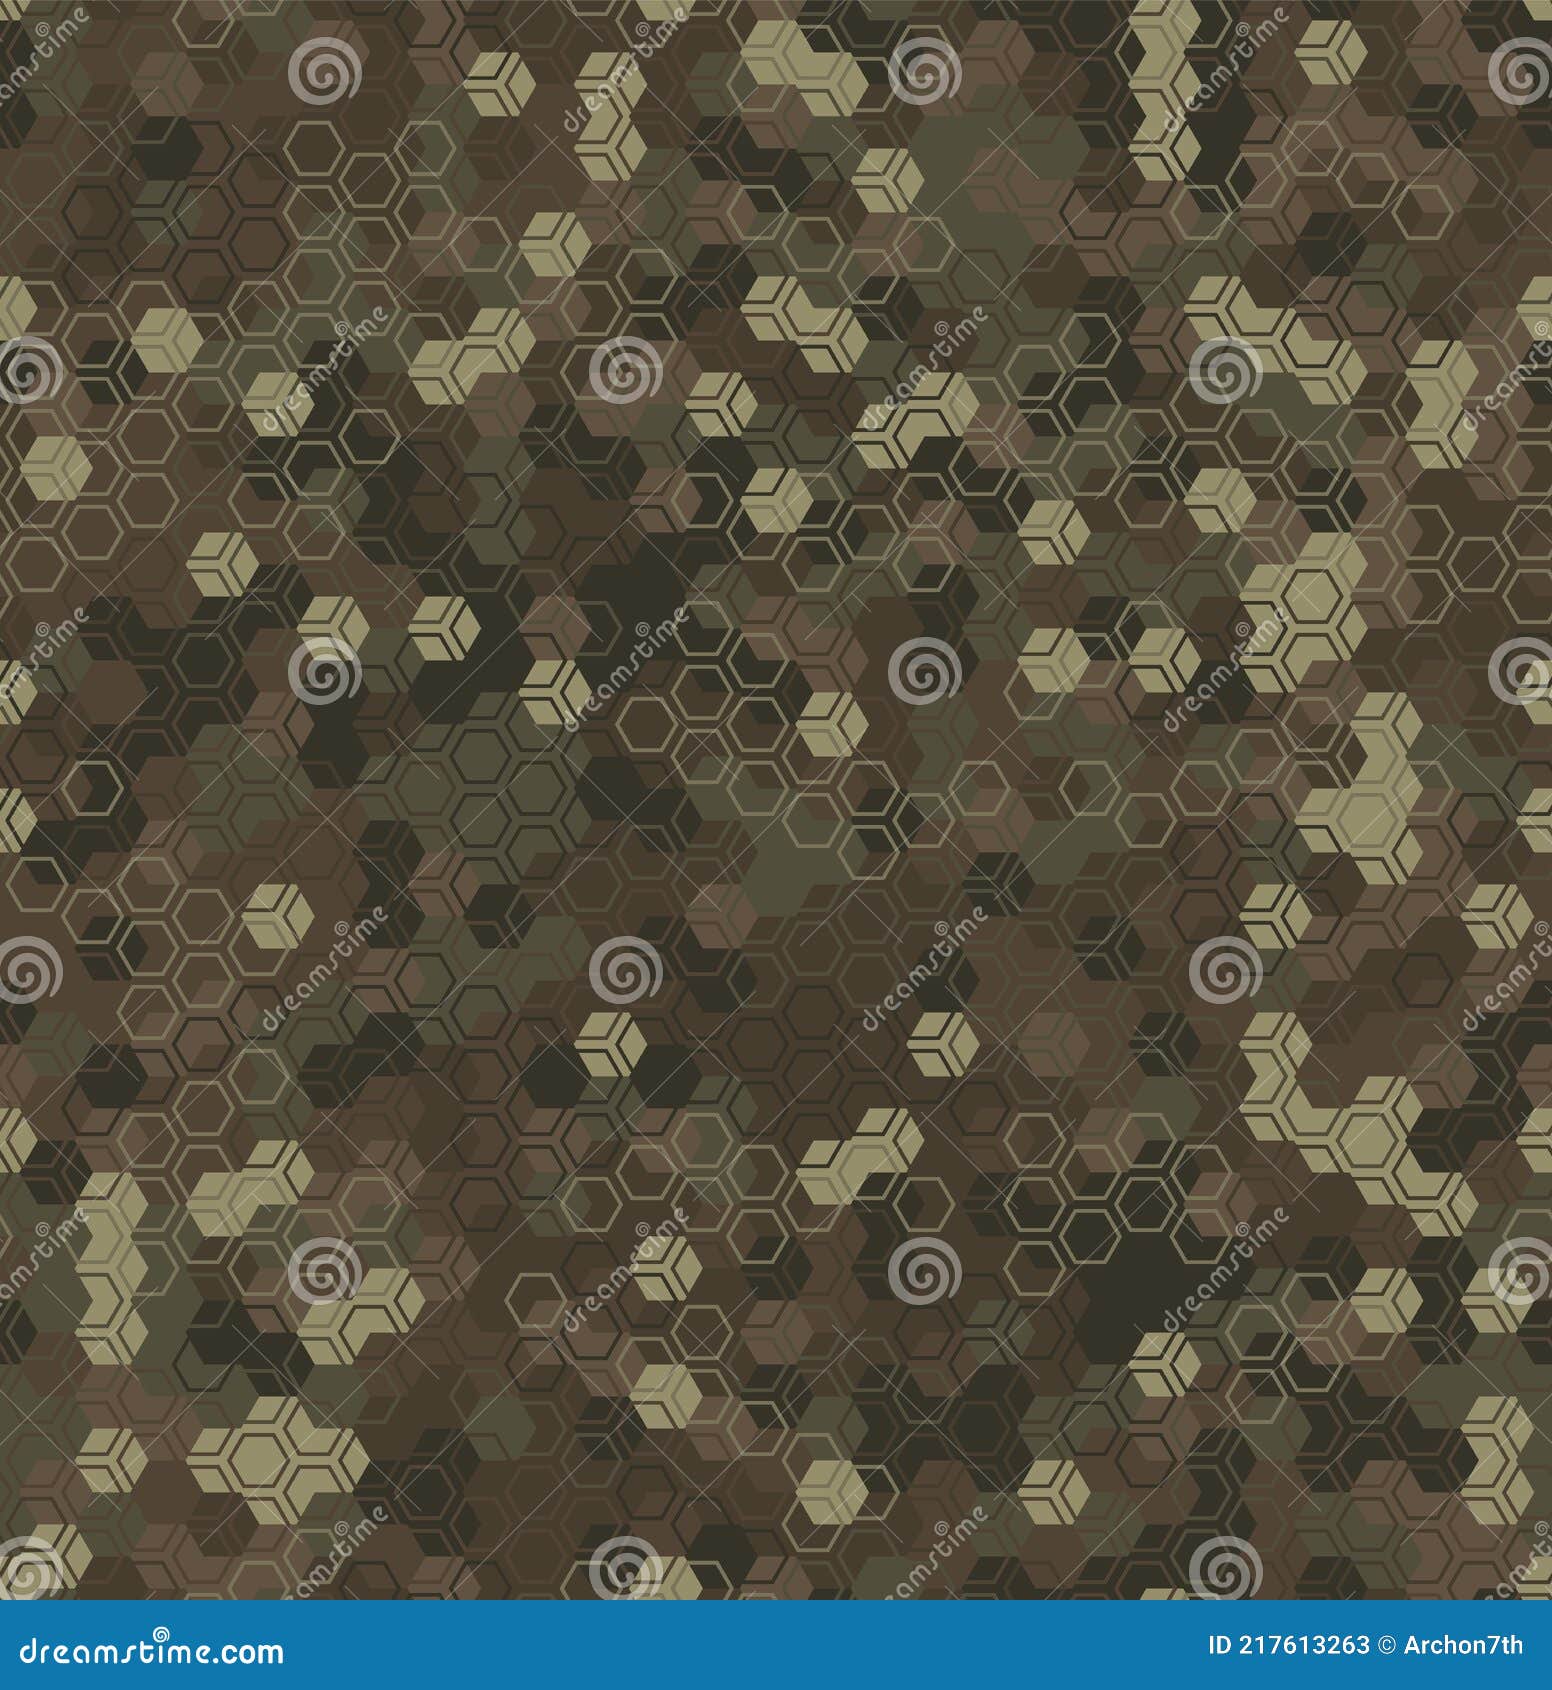 Texture Military Camouflage Seamless Pattern. Abstract Army Vector ...